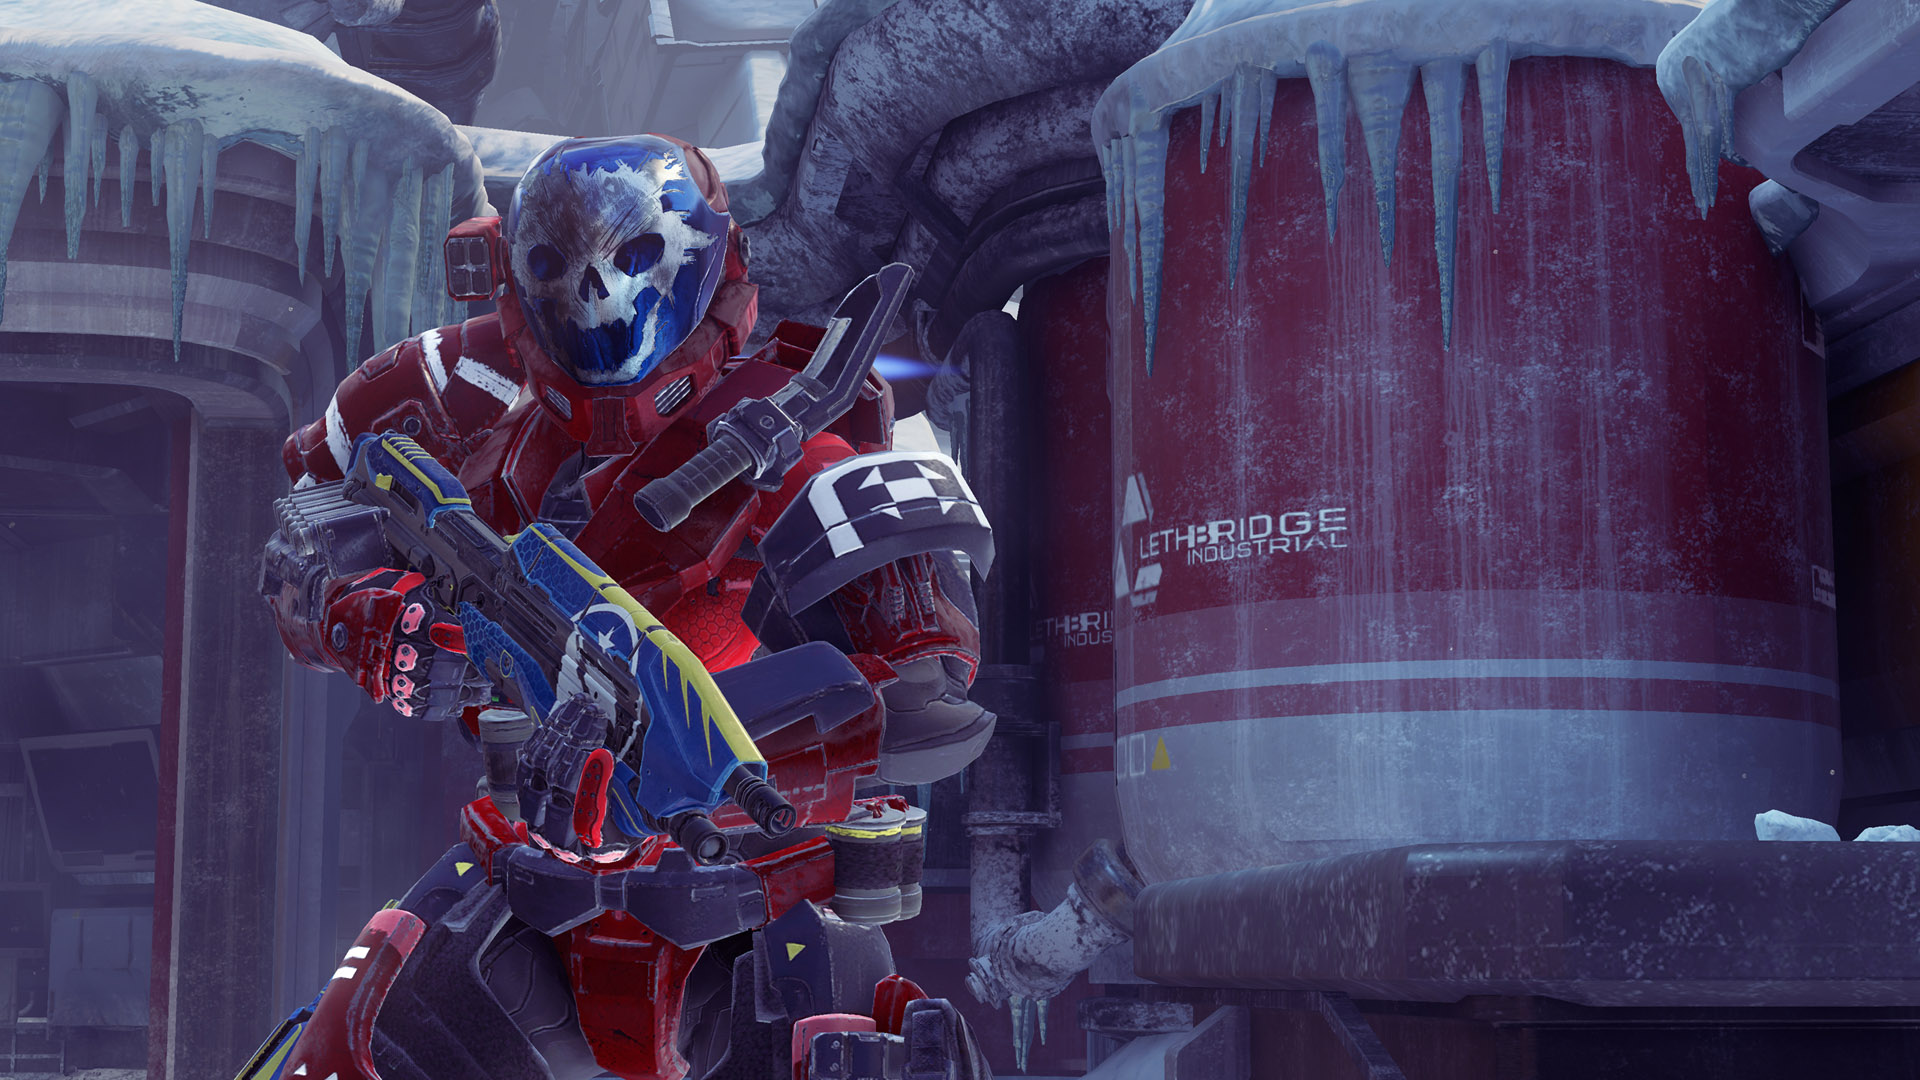 halo 5 matchmaking encountered difficulties